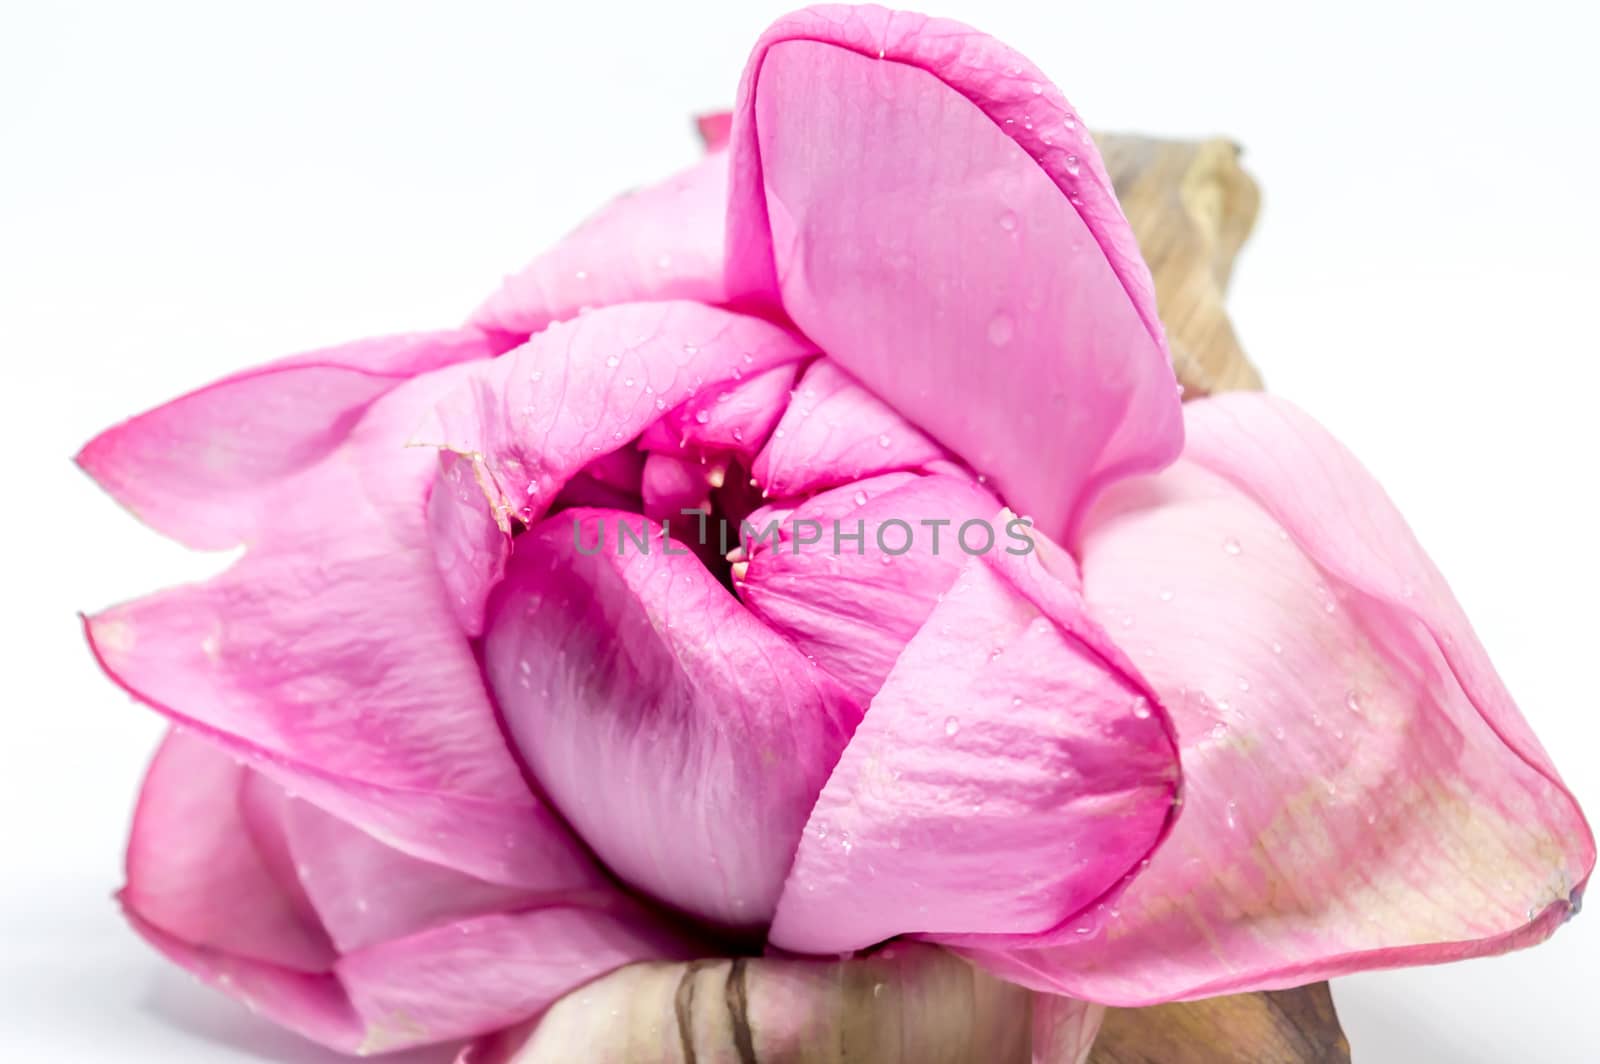 Lotus or Lily Flower. Spa icon. Element relaxation and rest symbol isolated on white. Close up pink color blooming water lily or lotus flower.